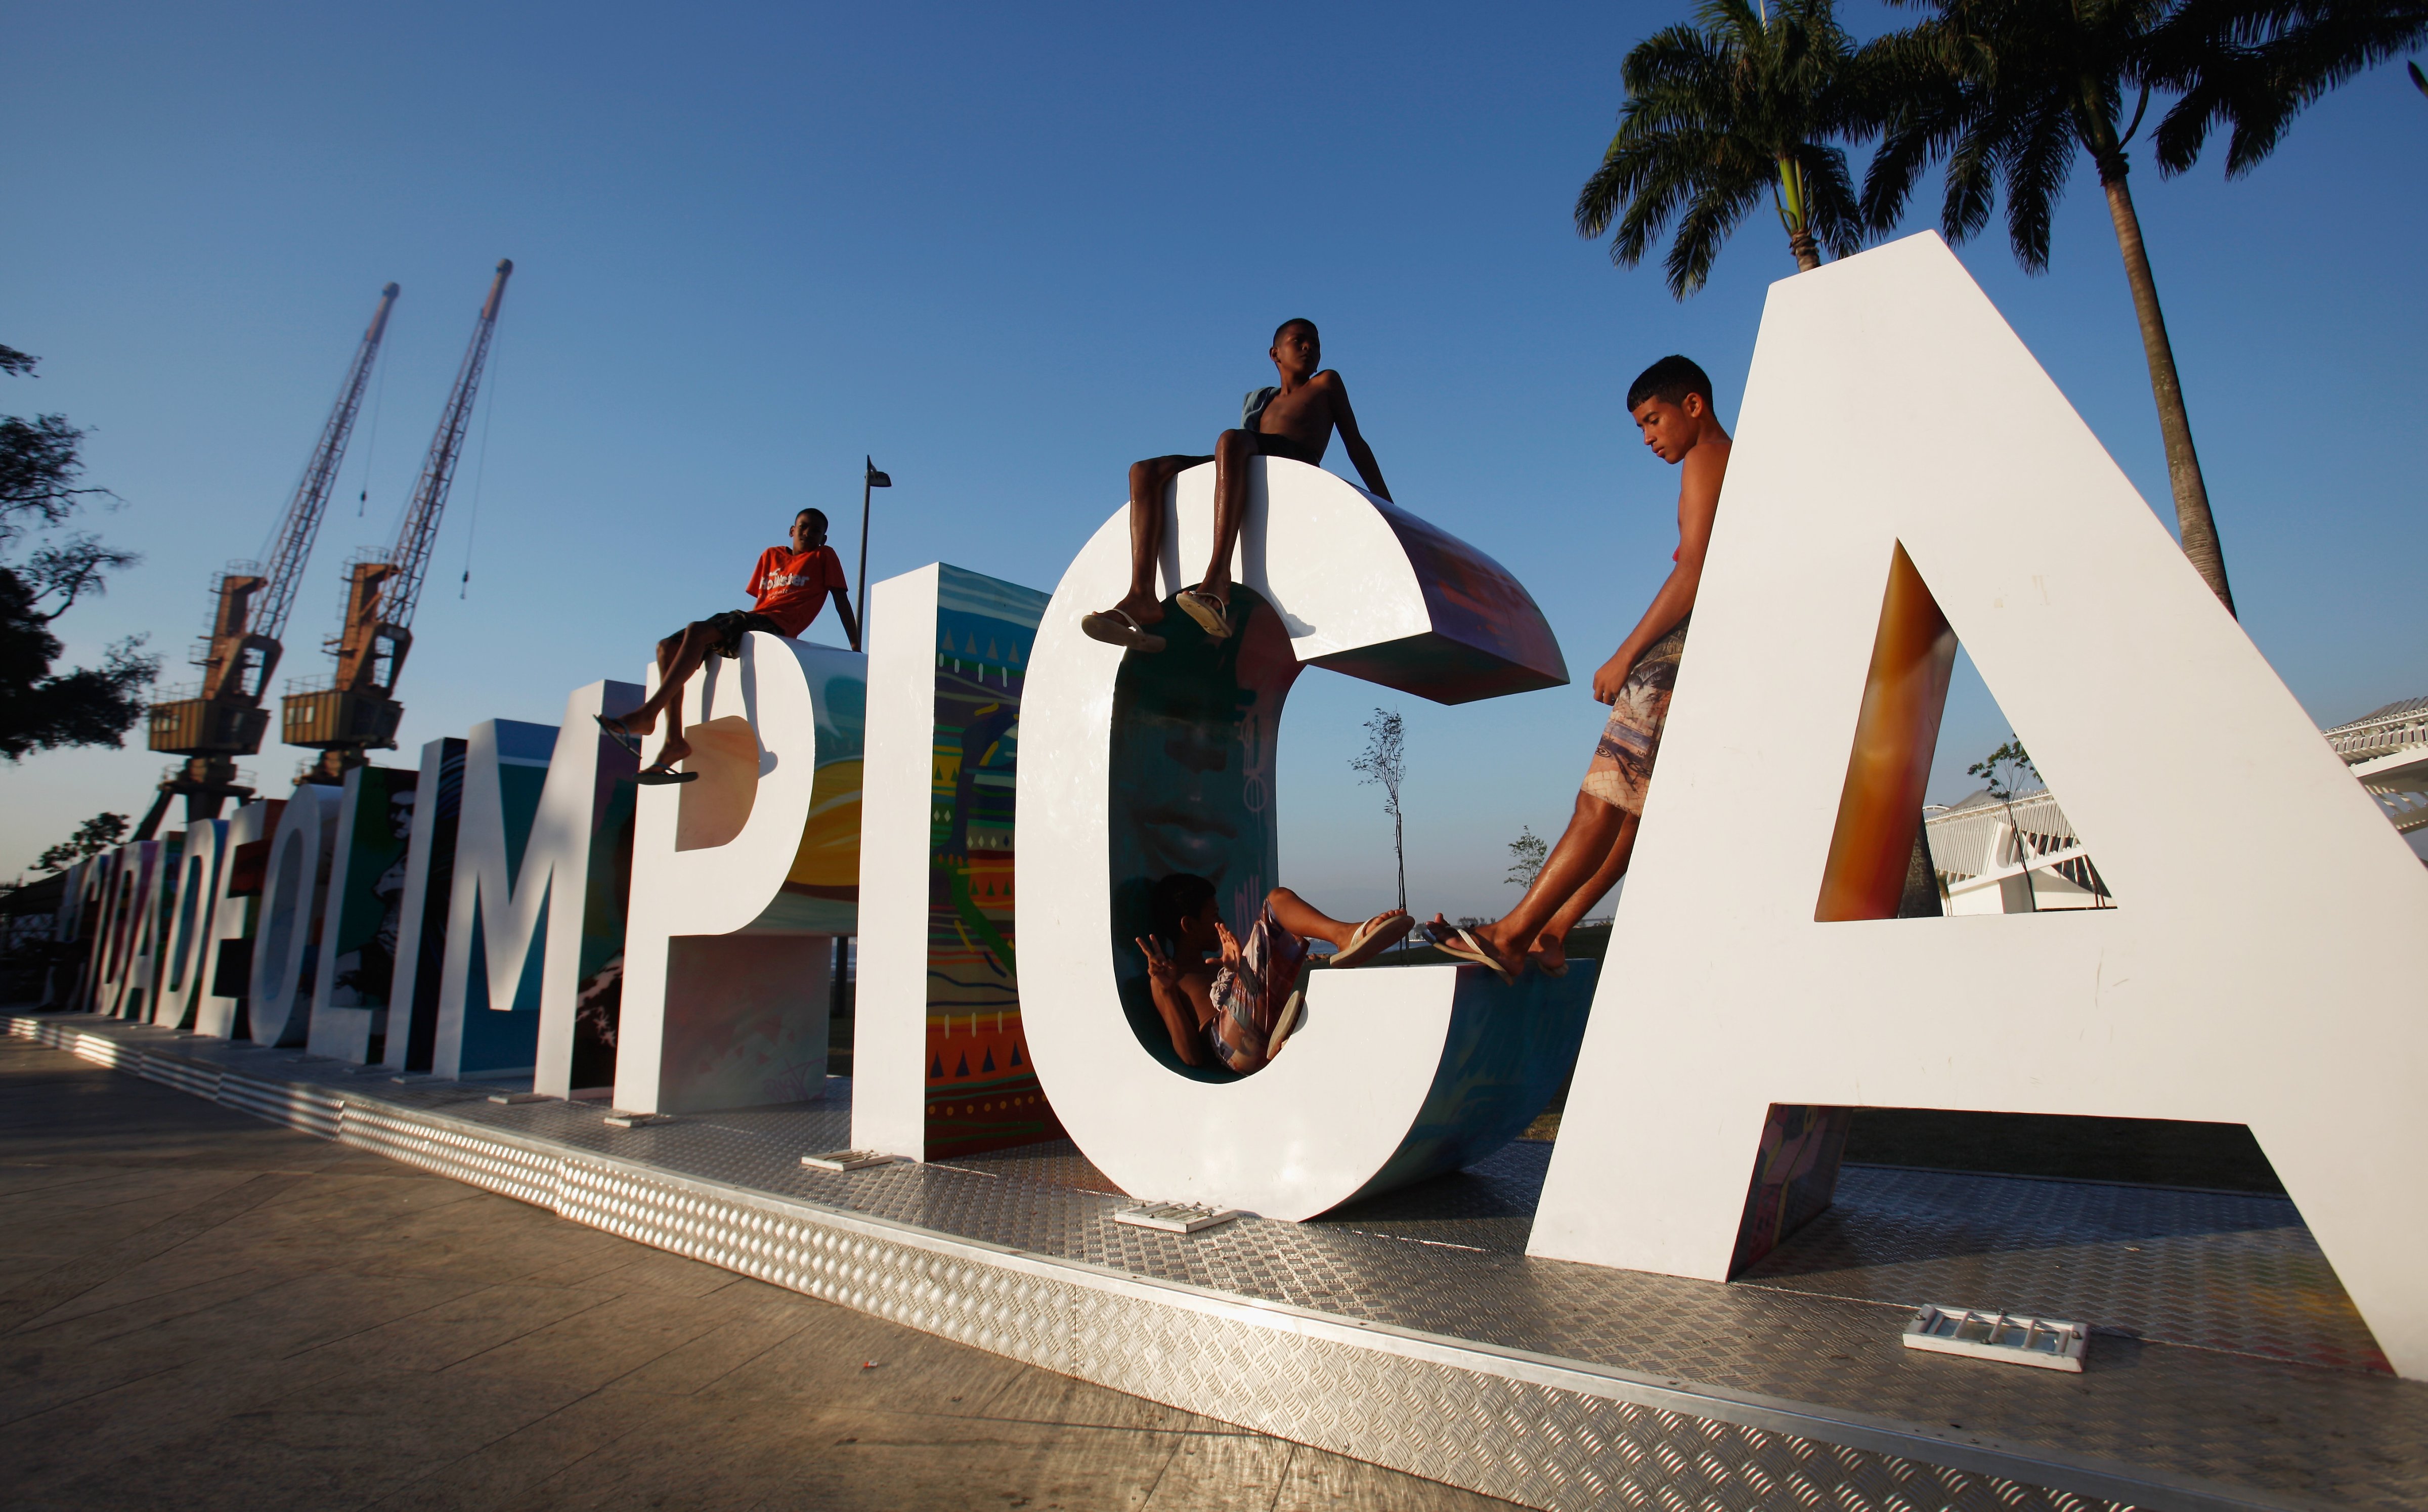 Teens sit on a new sign reading 'Cidade Olimpica' (Olympic City) in the historic port district in Rio de Janeiro, Brazil on Oct. 15, 2015. (Mario Tama—Getty Images)